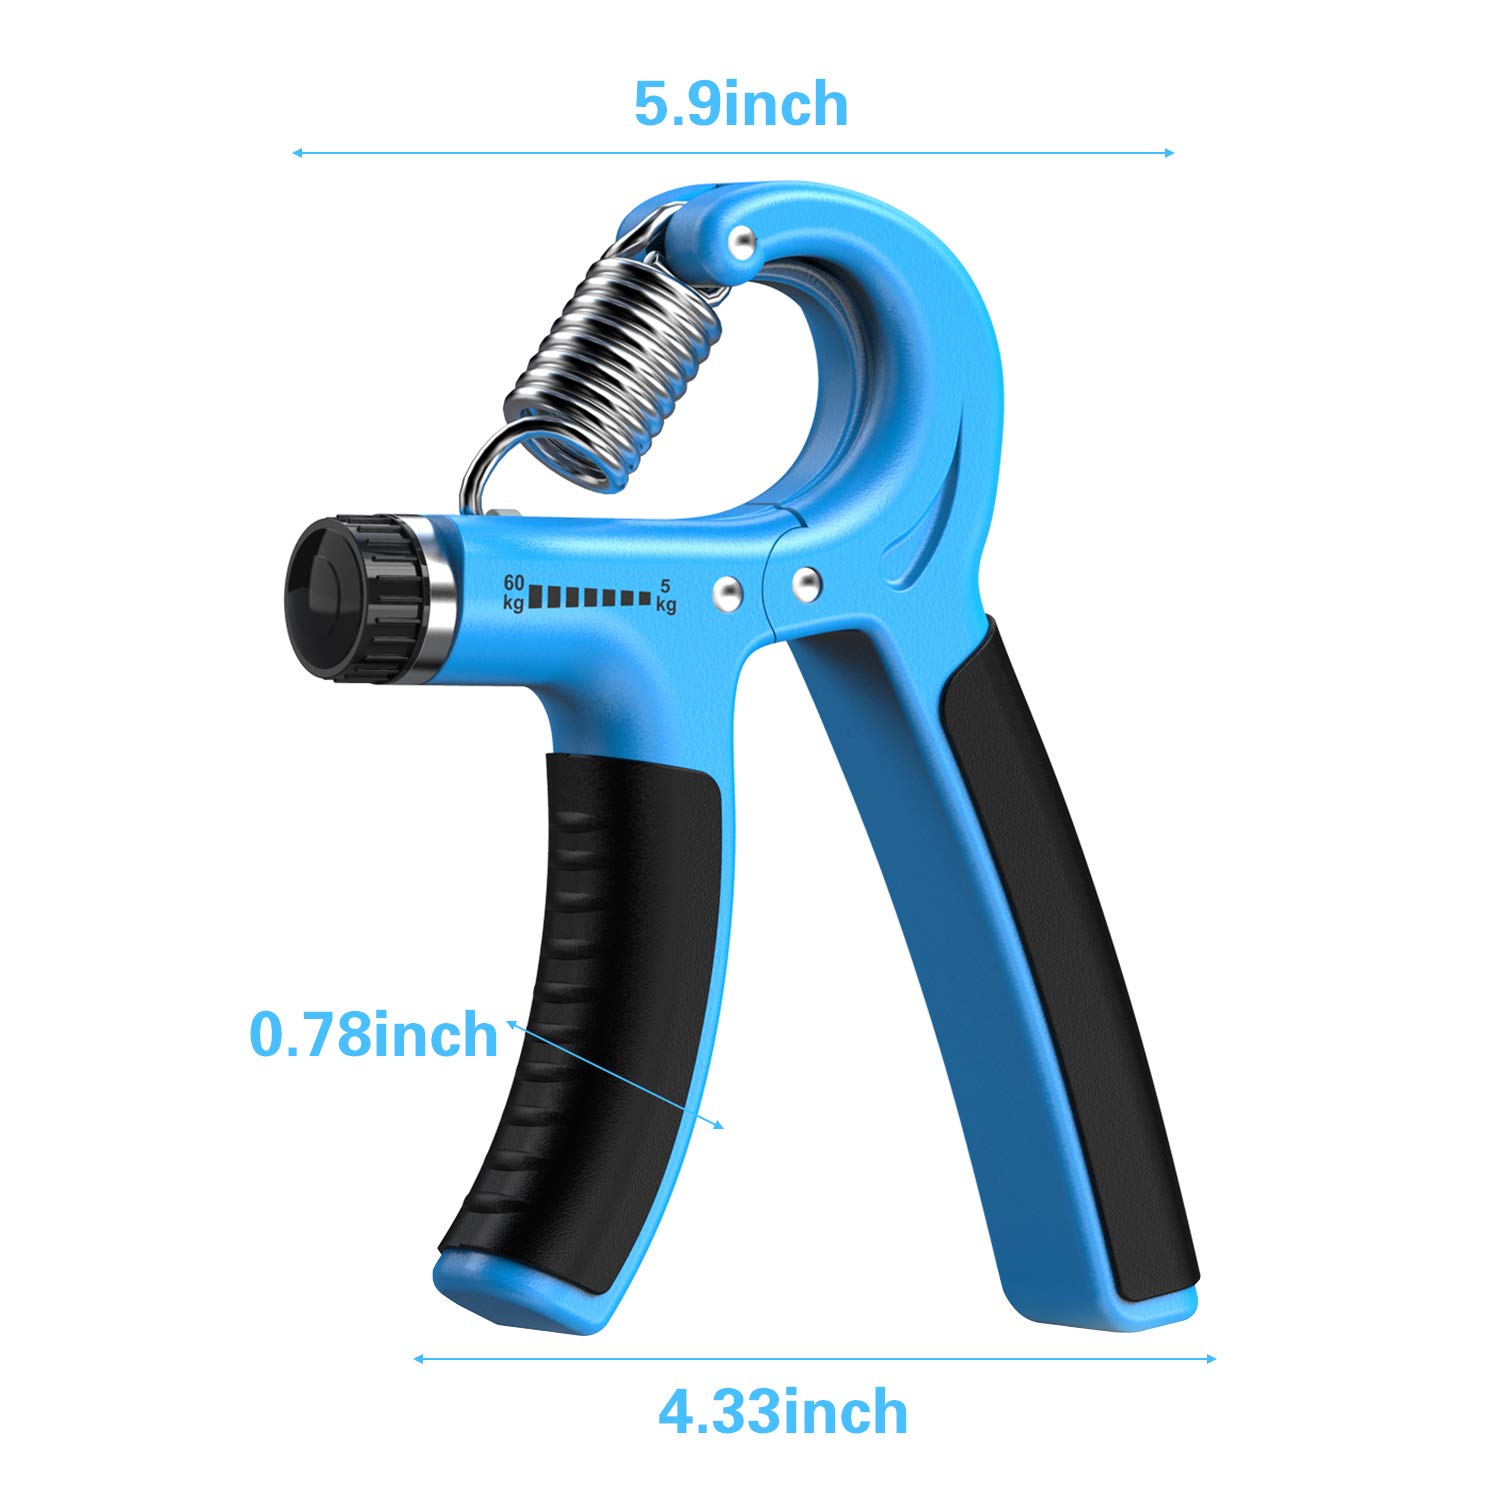 Longang Hand Grip Strengthener with Adjustable Resistance 11-132 Lbs (5-60kg), Wrist Strengthener, Forearm Gripper, Hand Workout Squeezer, Grip strength Trainer $3.99